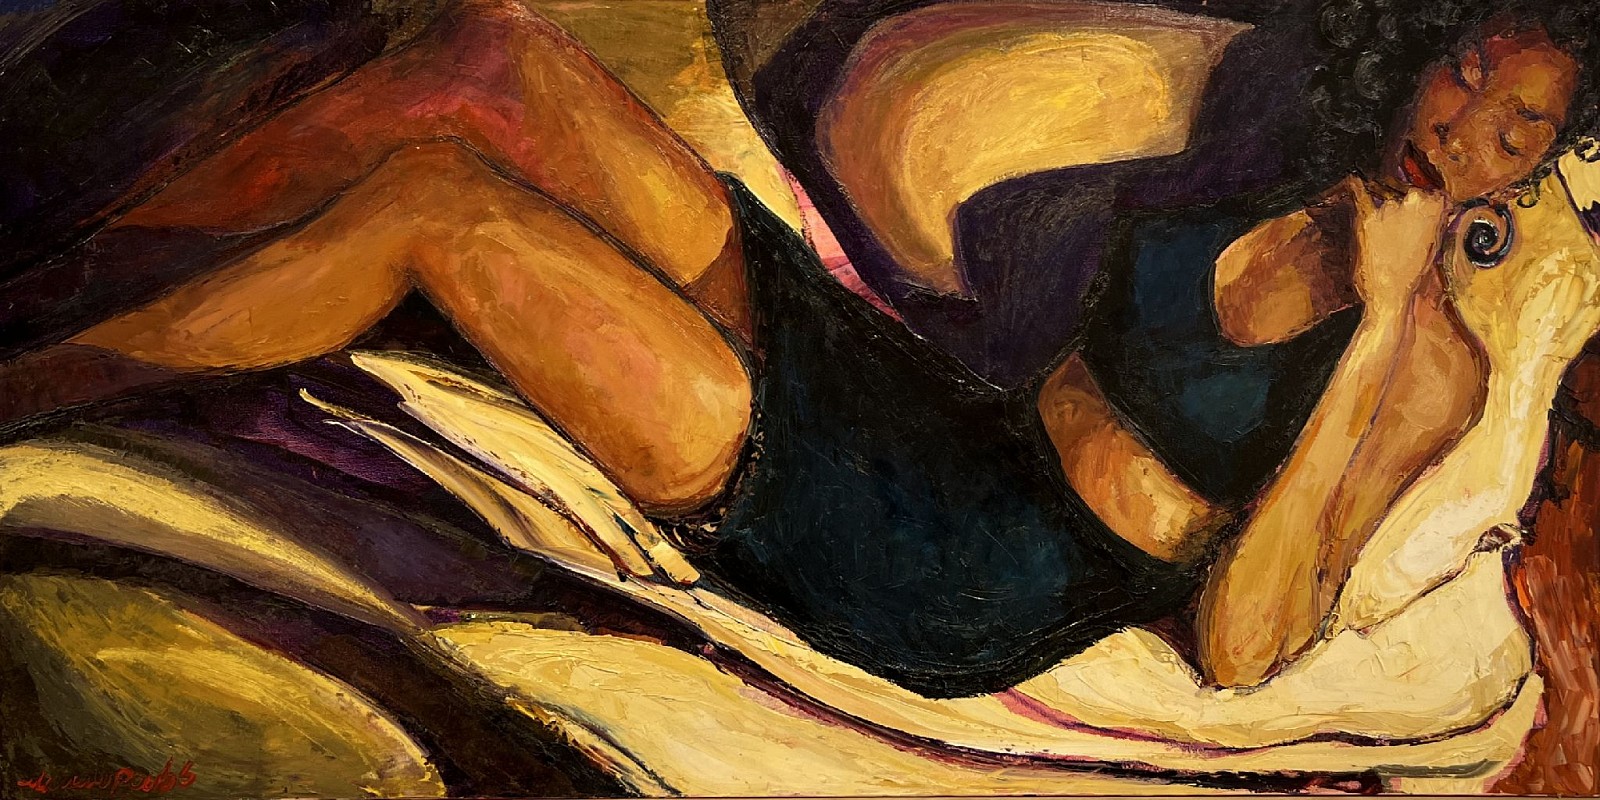 James Michalopoulos, Loungealopoulos
Oil on Canvas, 24 x 48 in.
$12,100